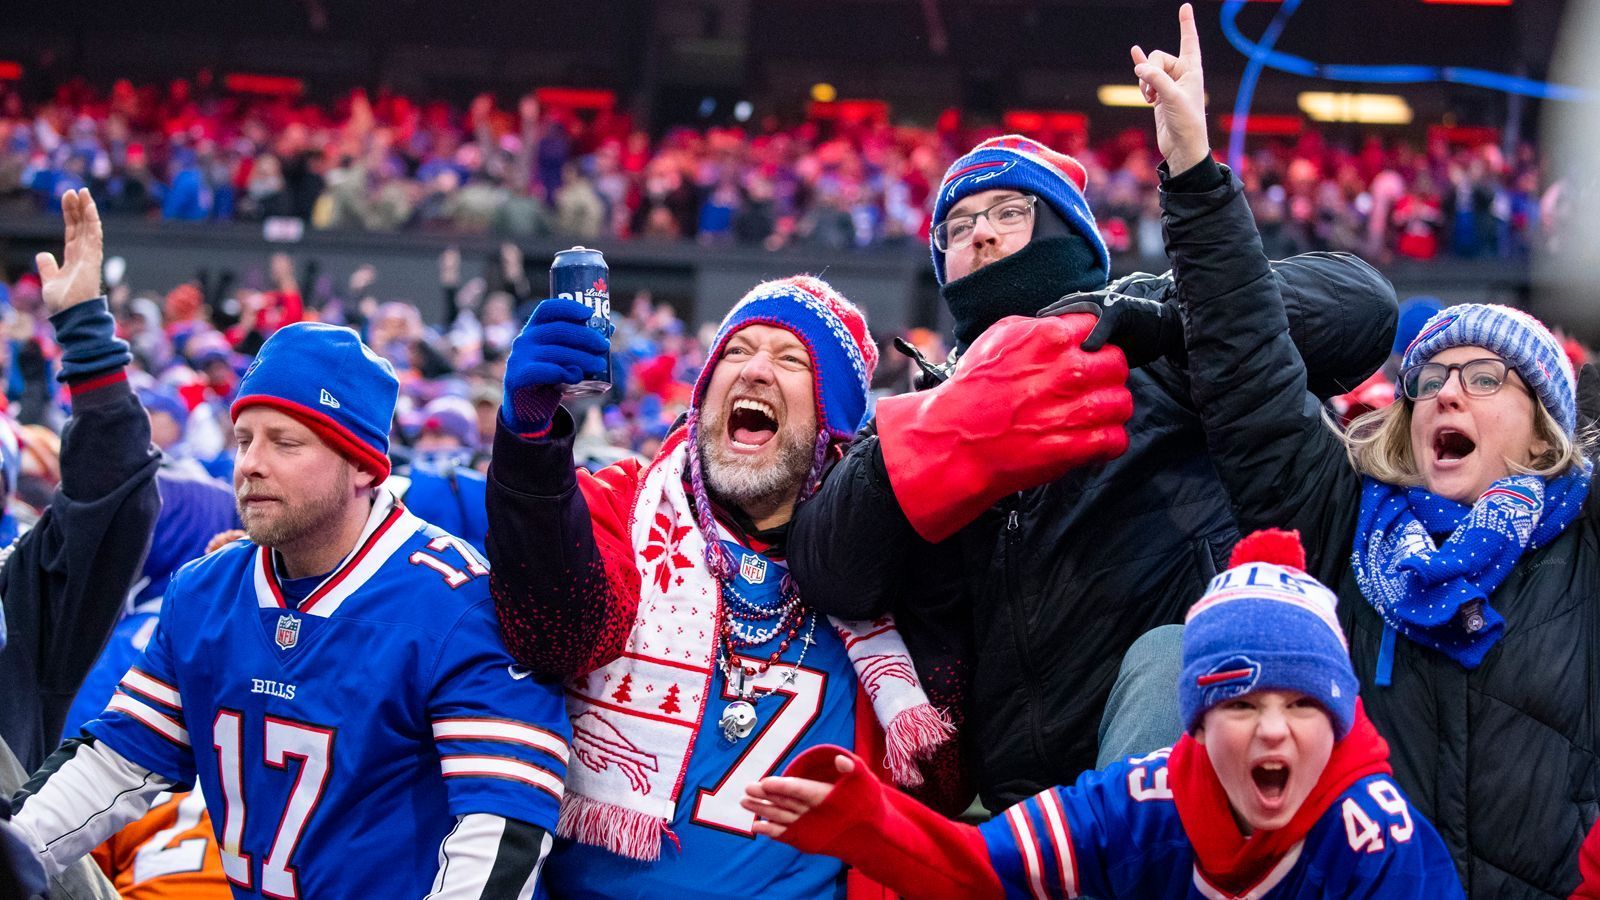 
                <strong>Buffalo Bills </strong><br>
                &#x2022; 1. Runde (Pick 30: Gregory Rousseau) - <br>&#x2022; 2. Runde (Pick 61: Boogie Basham) - <br>&#x2022; 3. Runde (Pick 93: Spencer Brown) - <br>&#x2022; 5. Runde (Pick 161: Tommy Doyle) - <br>&#x2022; 6. Runde (Pick 203: Marquez Stephenson, Pick 212: Damar Hamlin, Pick 213: Rashad Wildgoose) - <br>&#x2022; 7. Runde (Pick 236: Jack Anderson) <br>
              